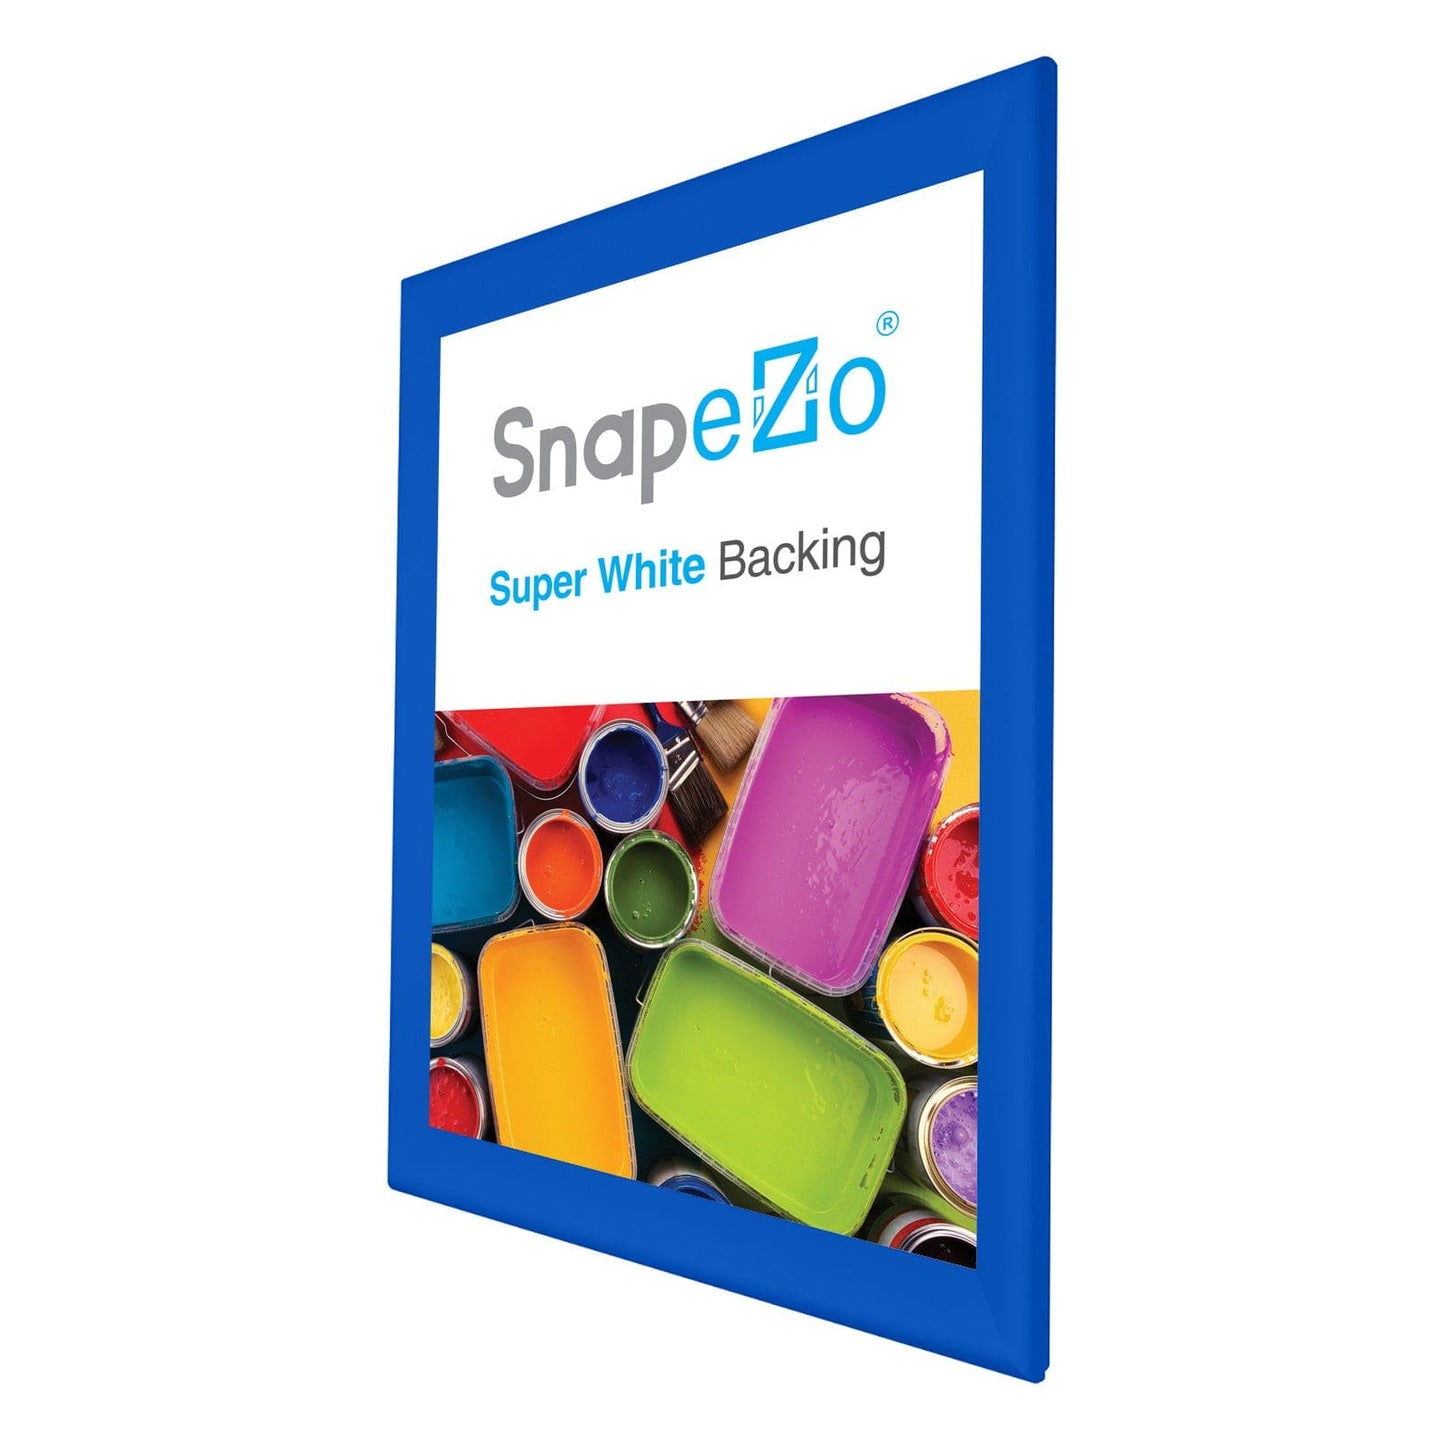 33x47 Blue SnapeZo® Snap Frame - 1.7" Profile - Snap Frames Direct